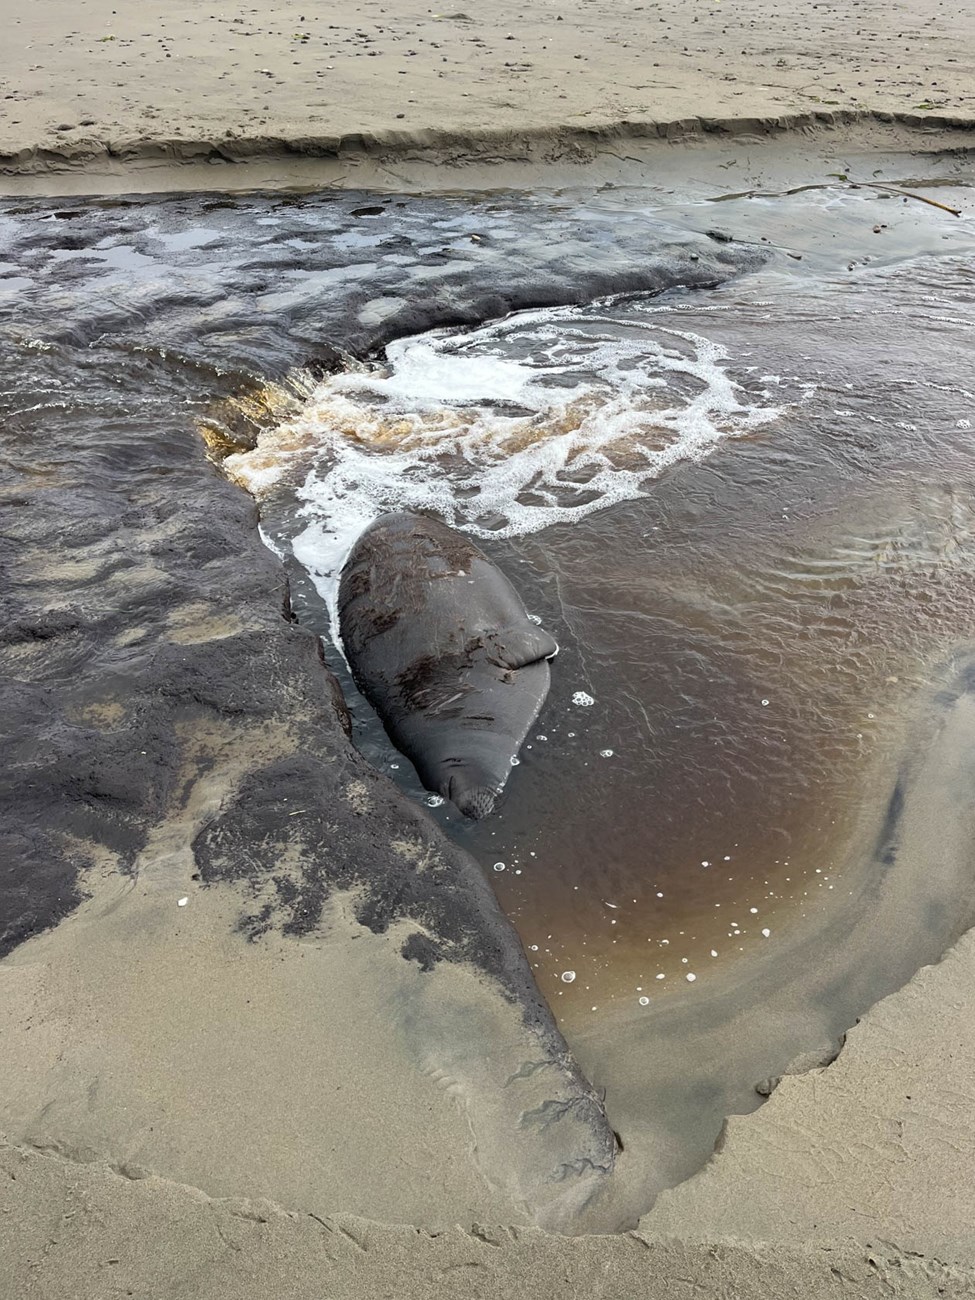 A seal with a patching gray-brown coat floats in a pool of running water on the beach.